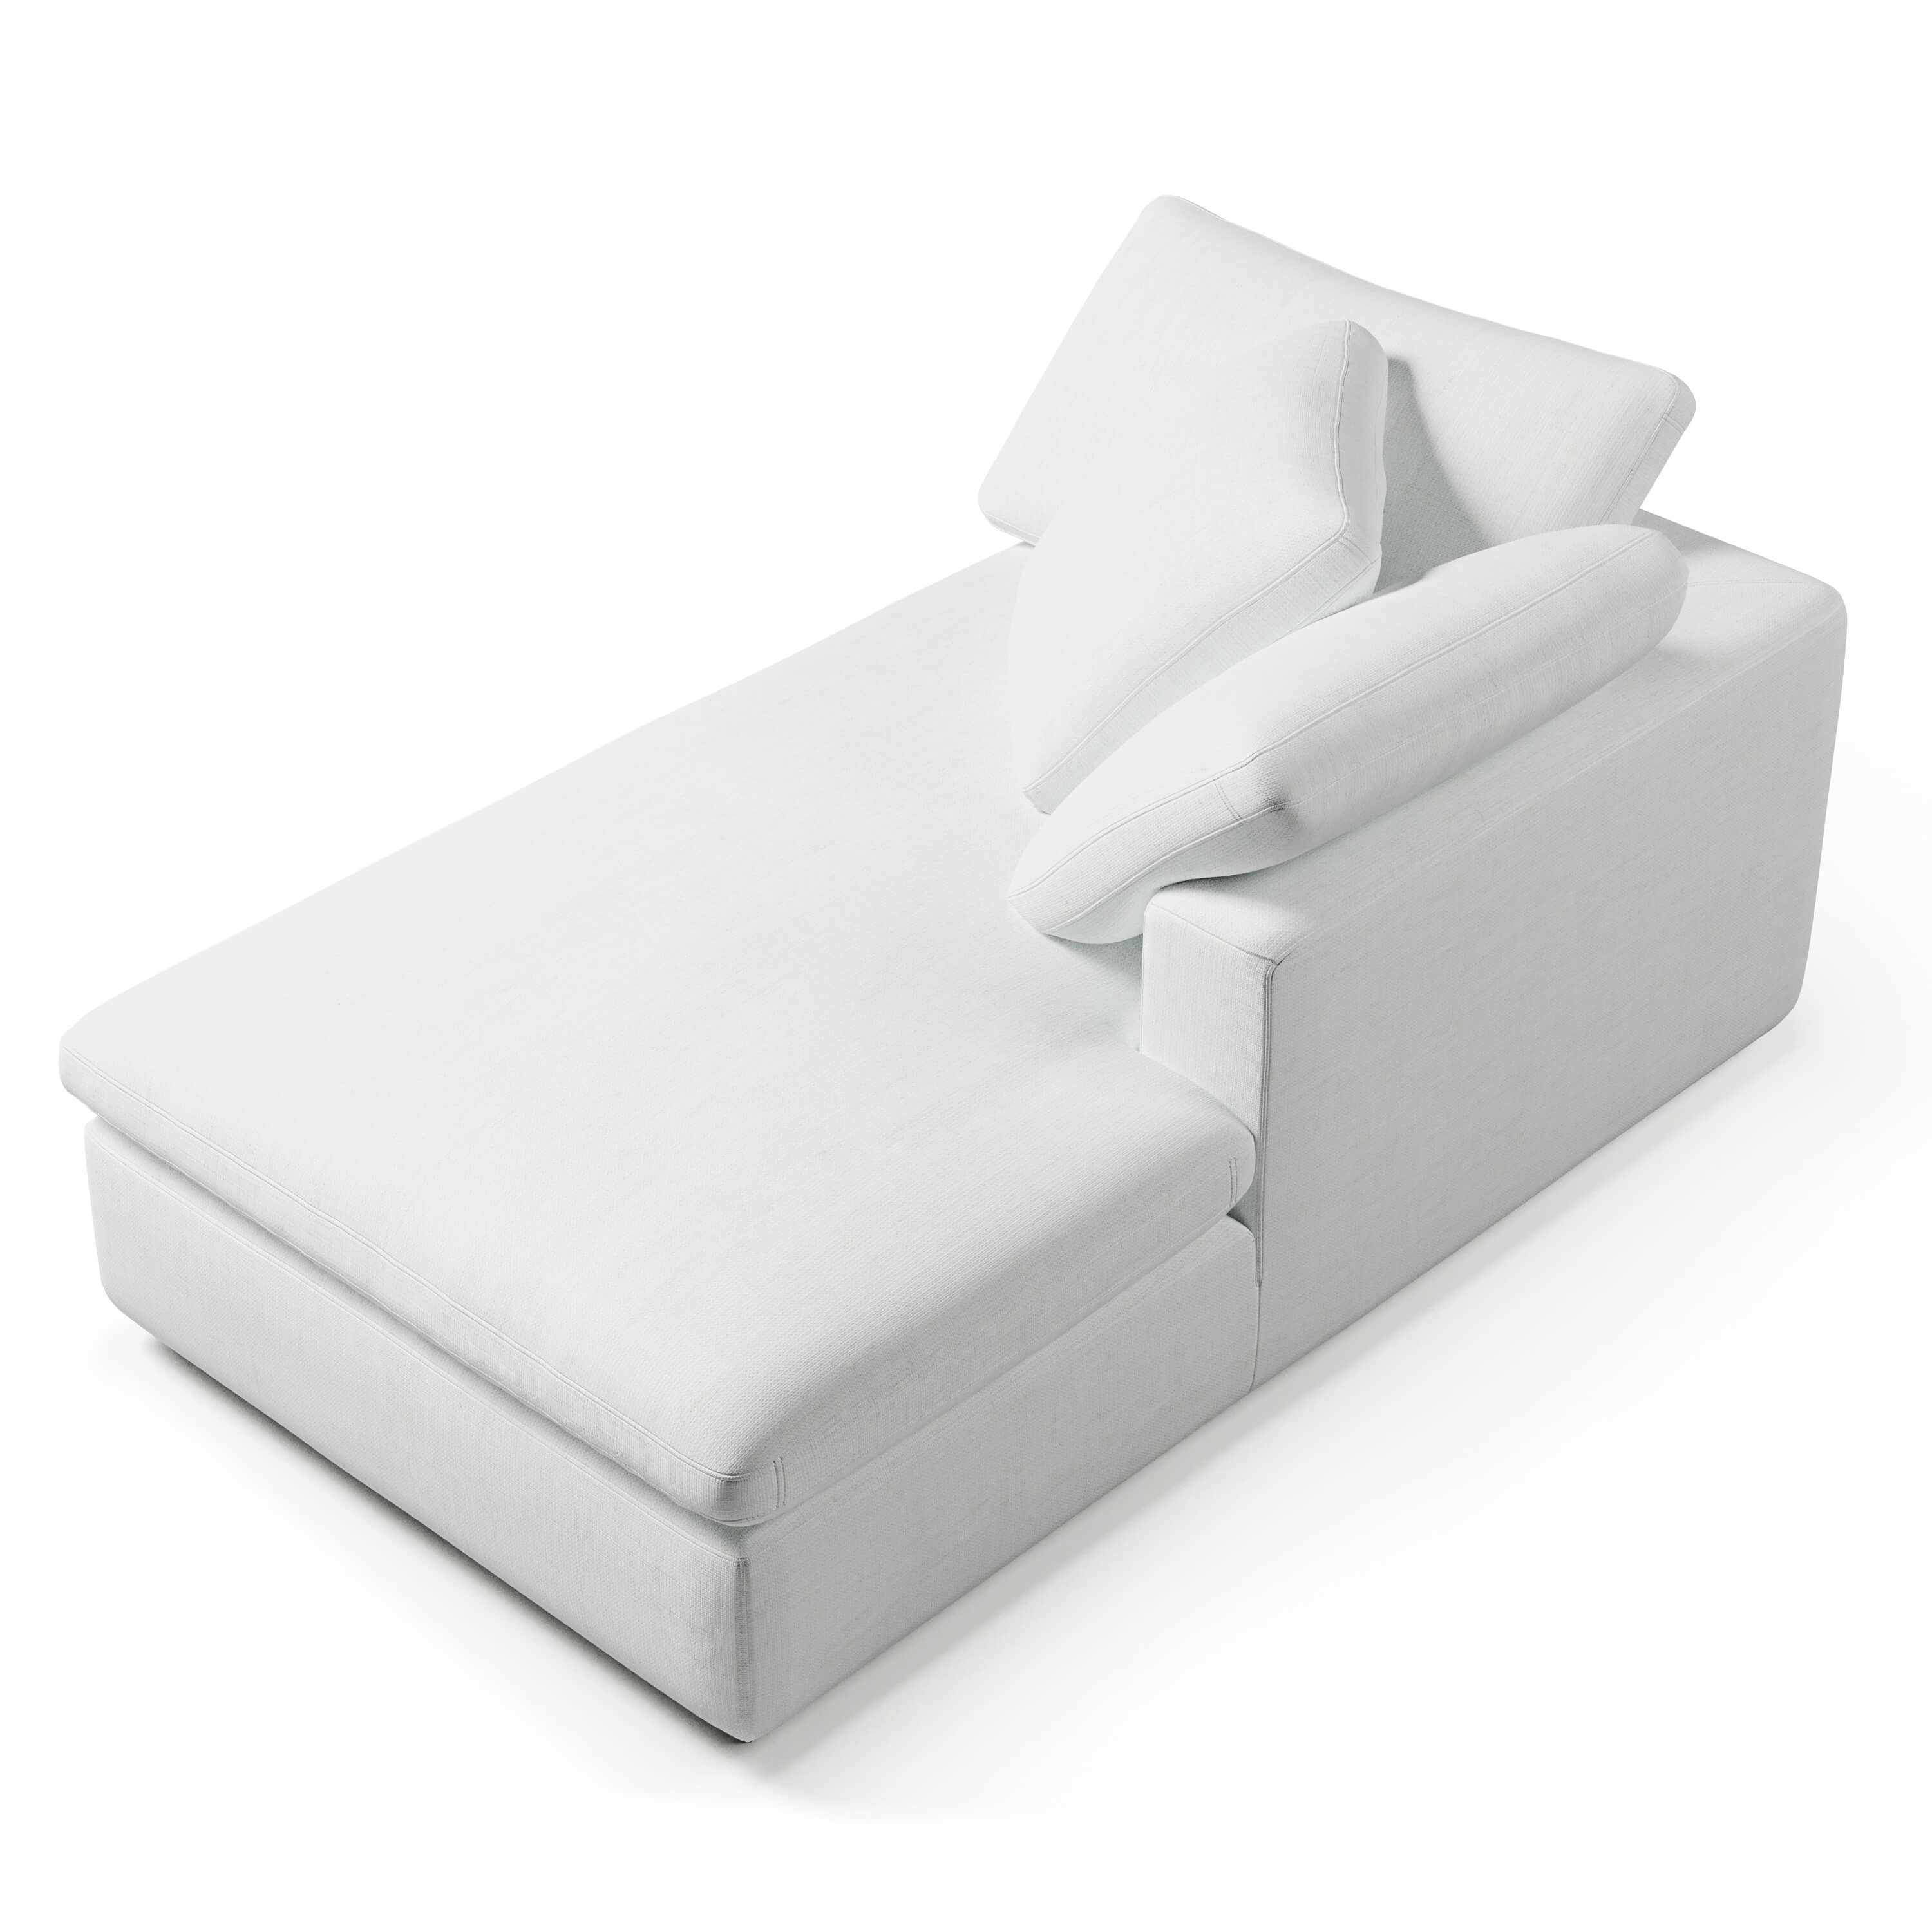 Comfy Chaise Chair - Right-Arm